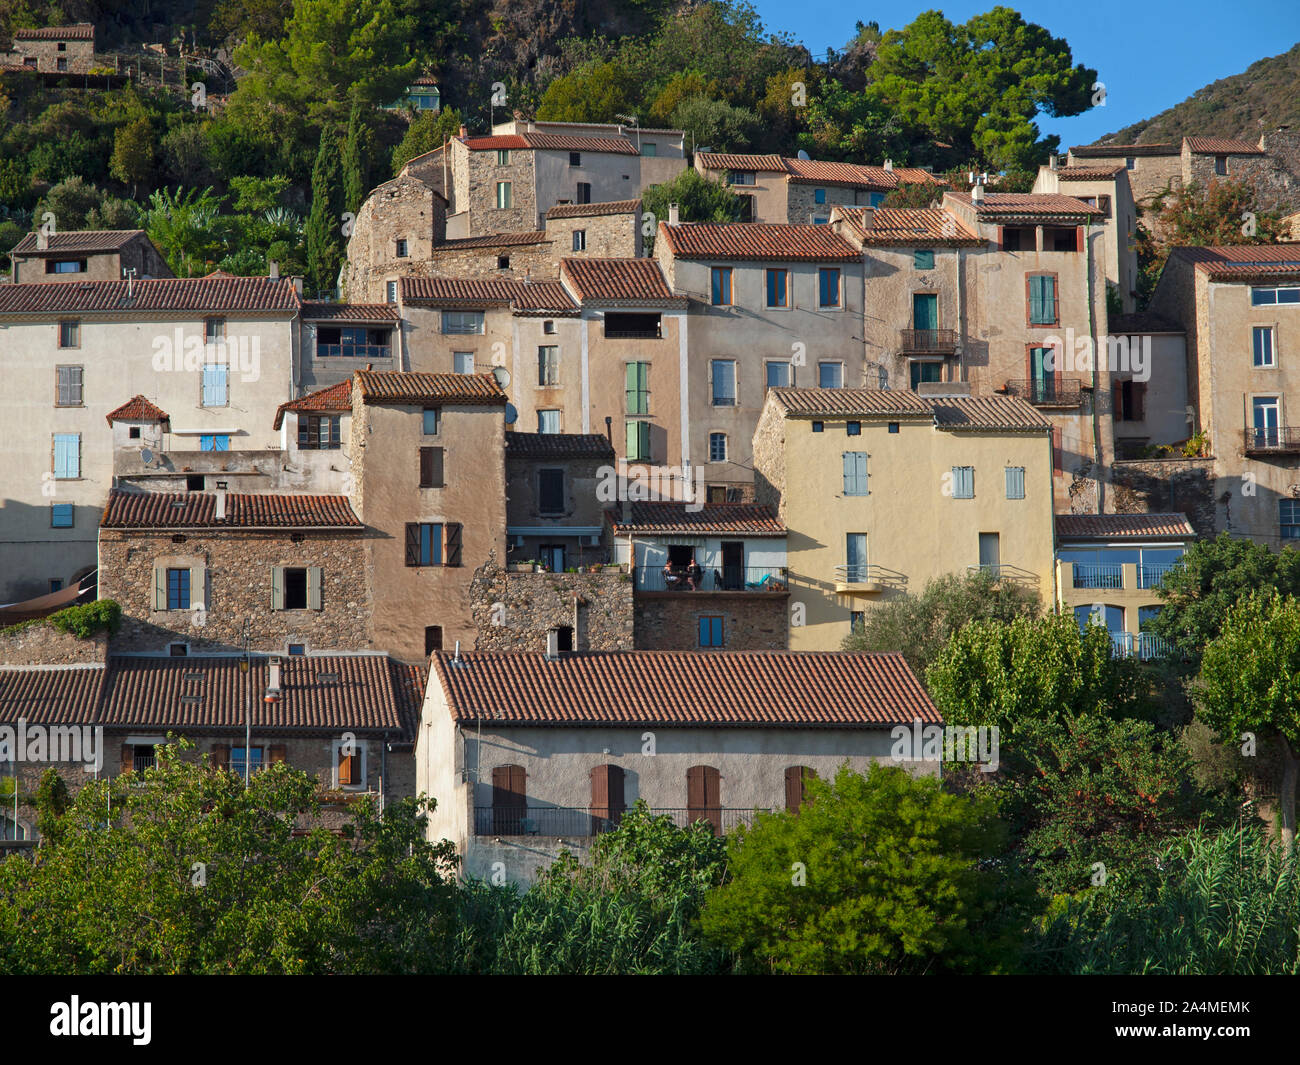 The village of Roquebrun in the Languedoc-Rousillon region of France Stock Photo